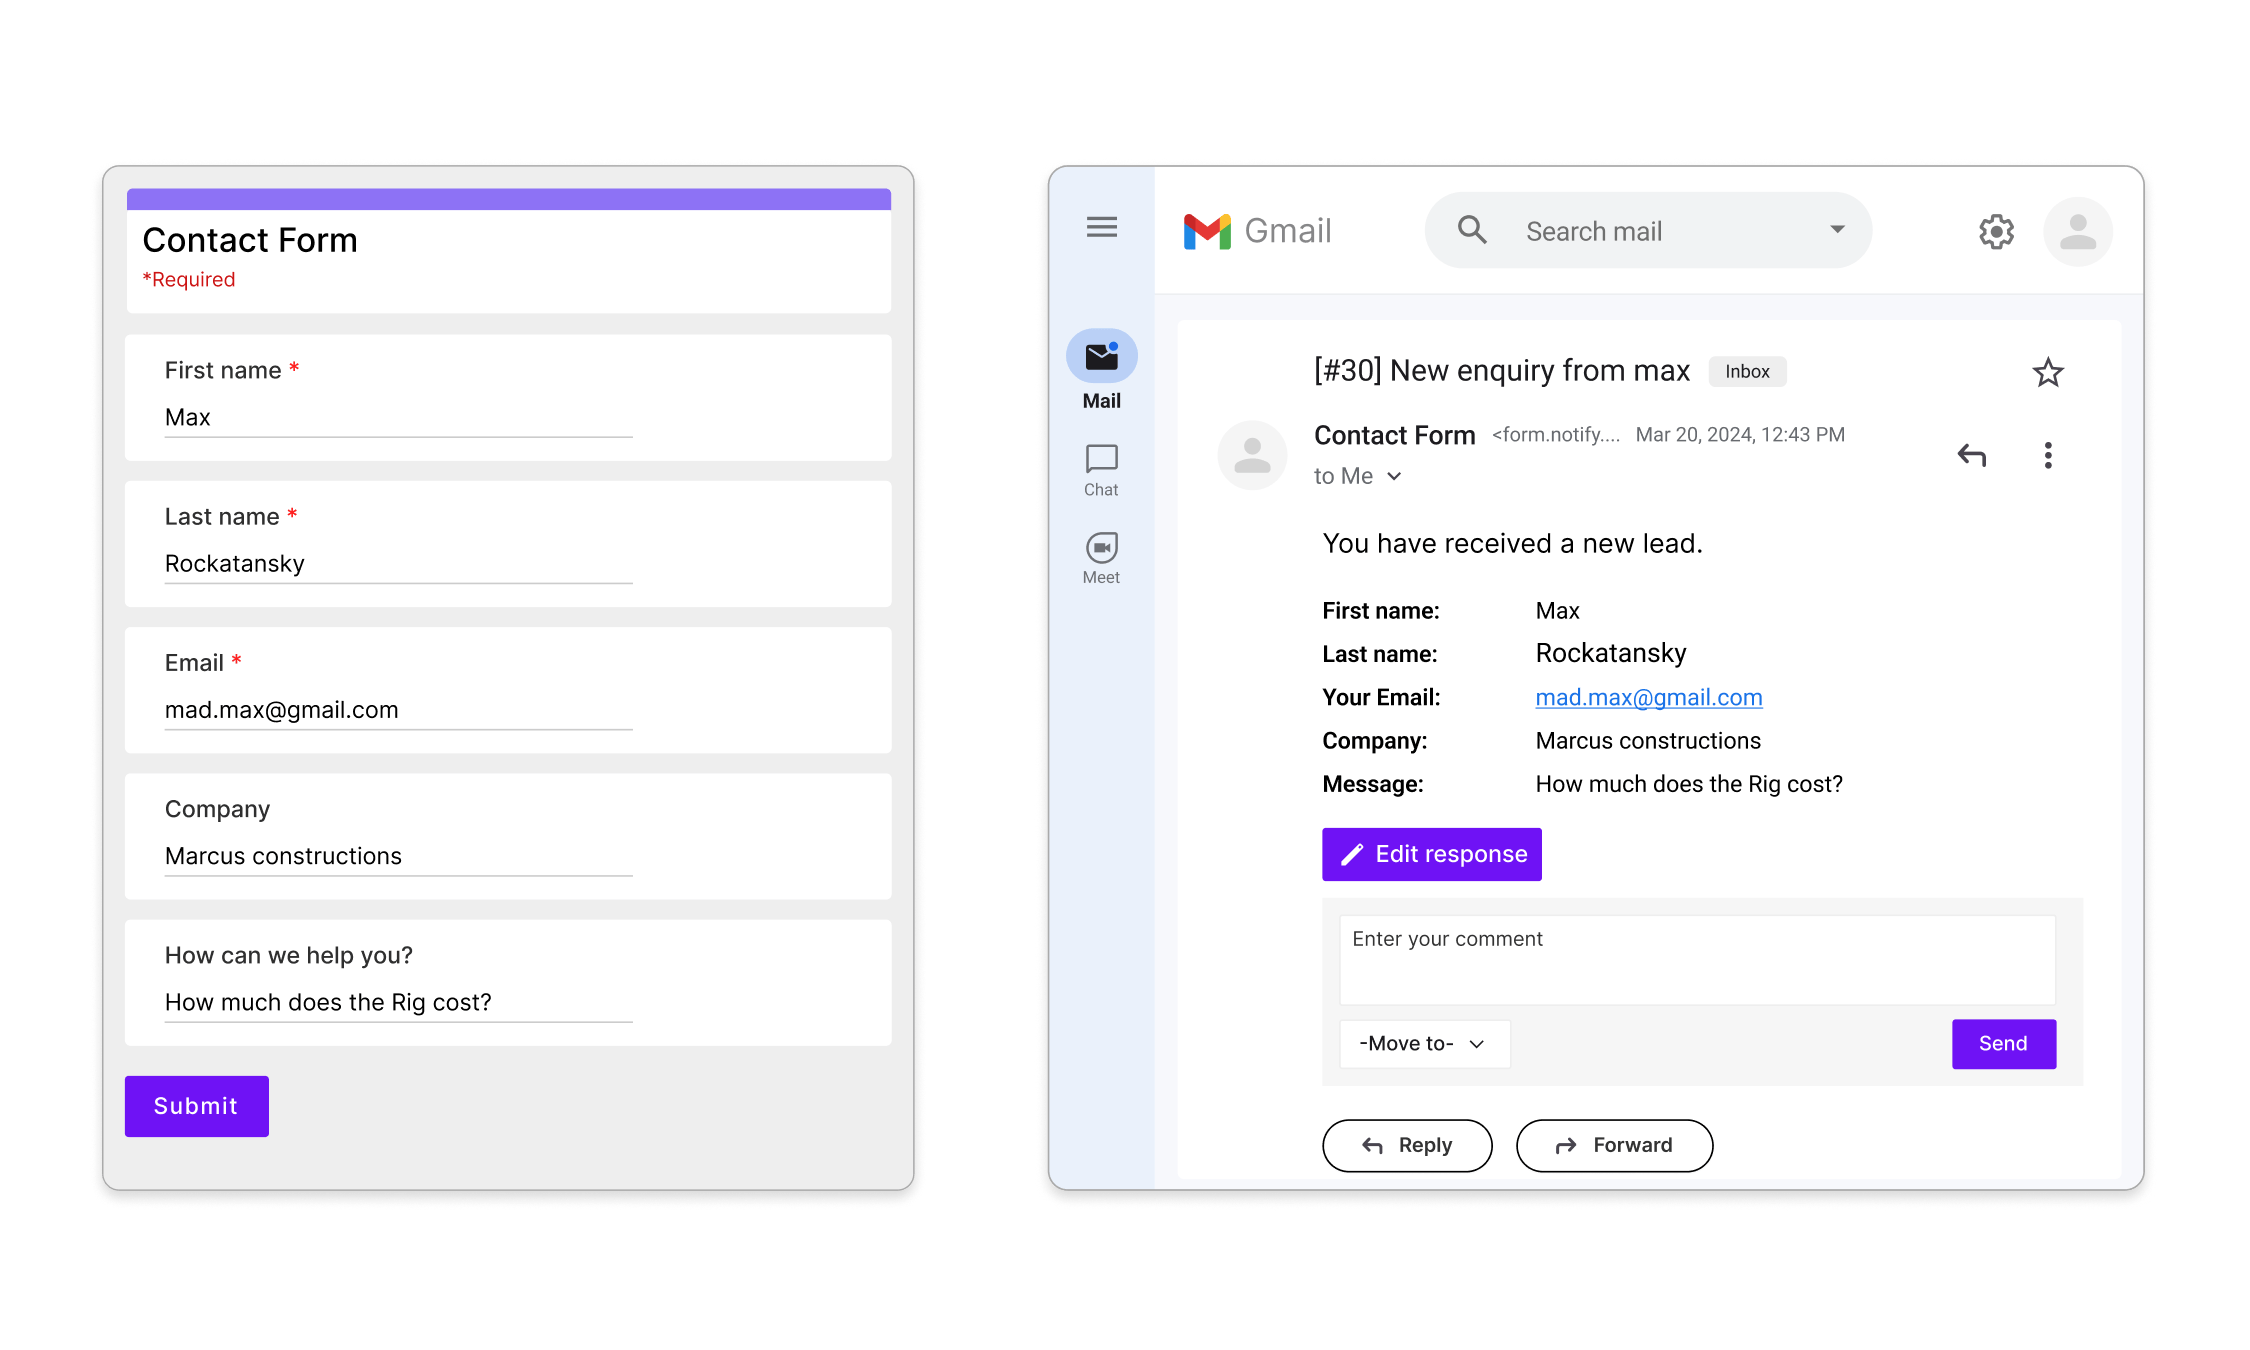 Send Google Forms response as email